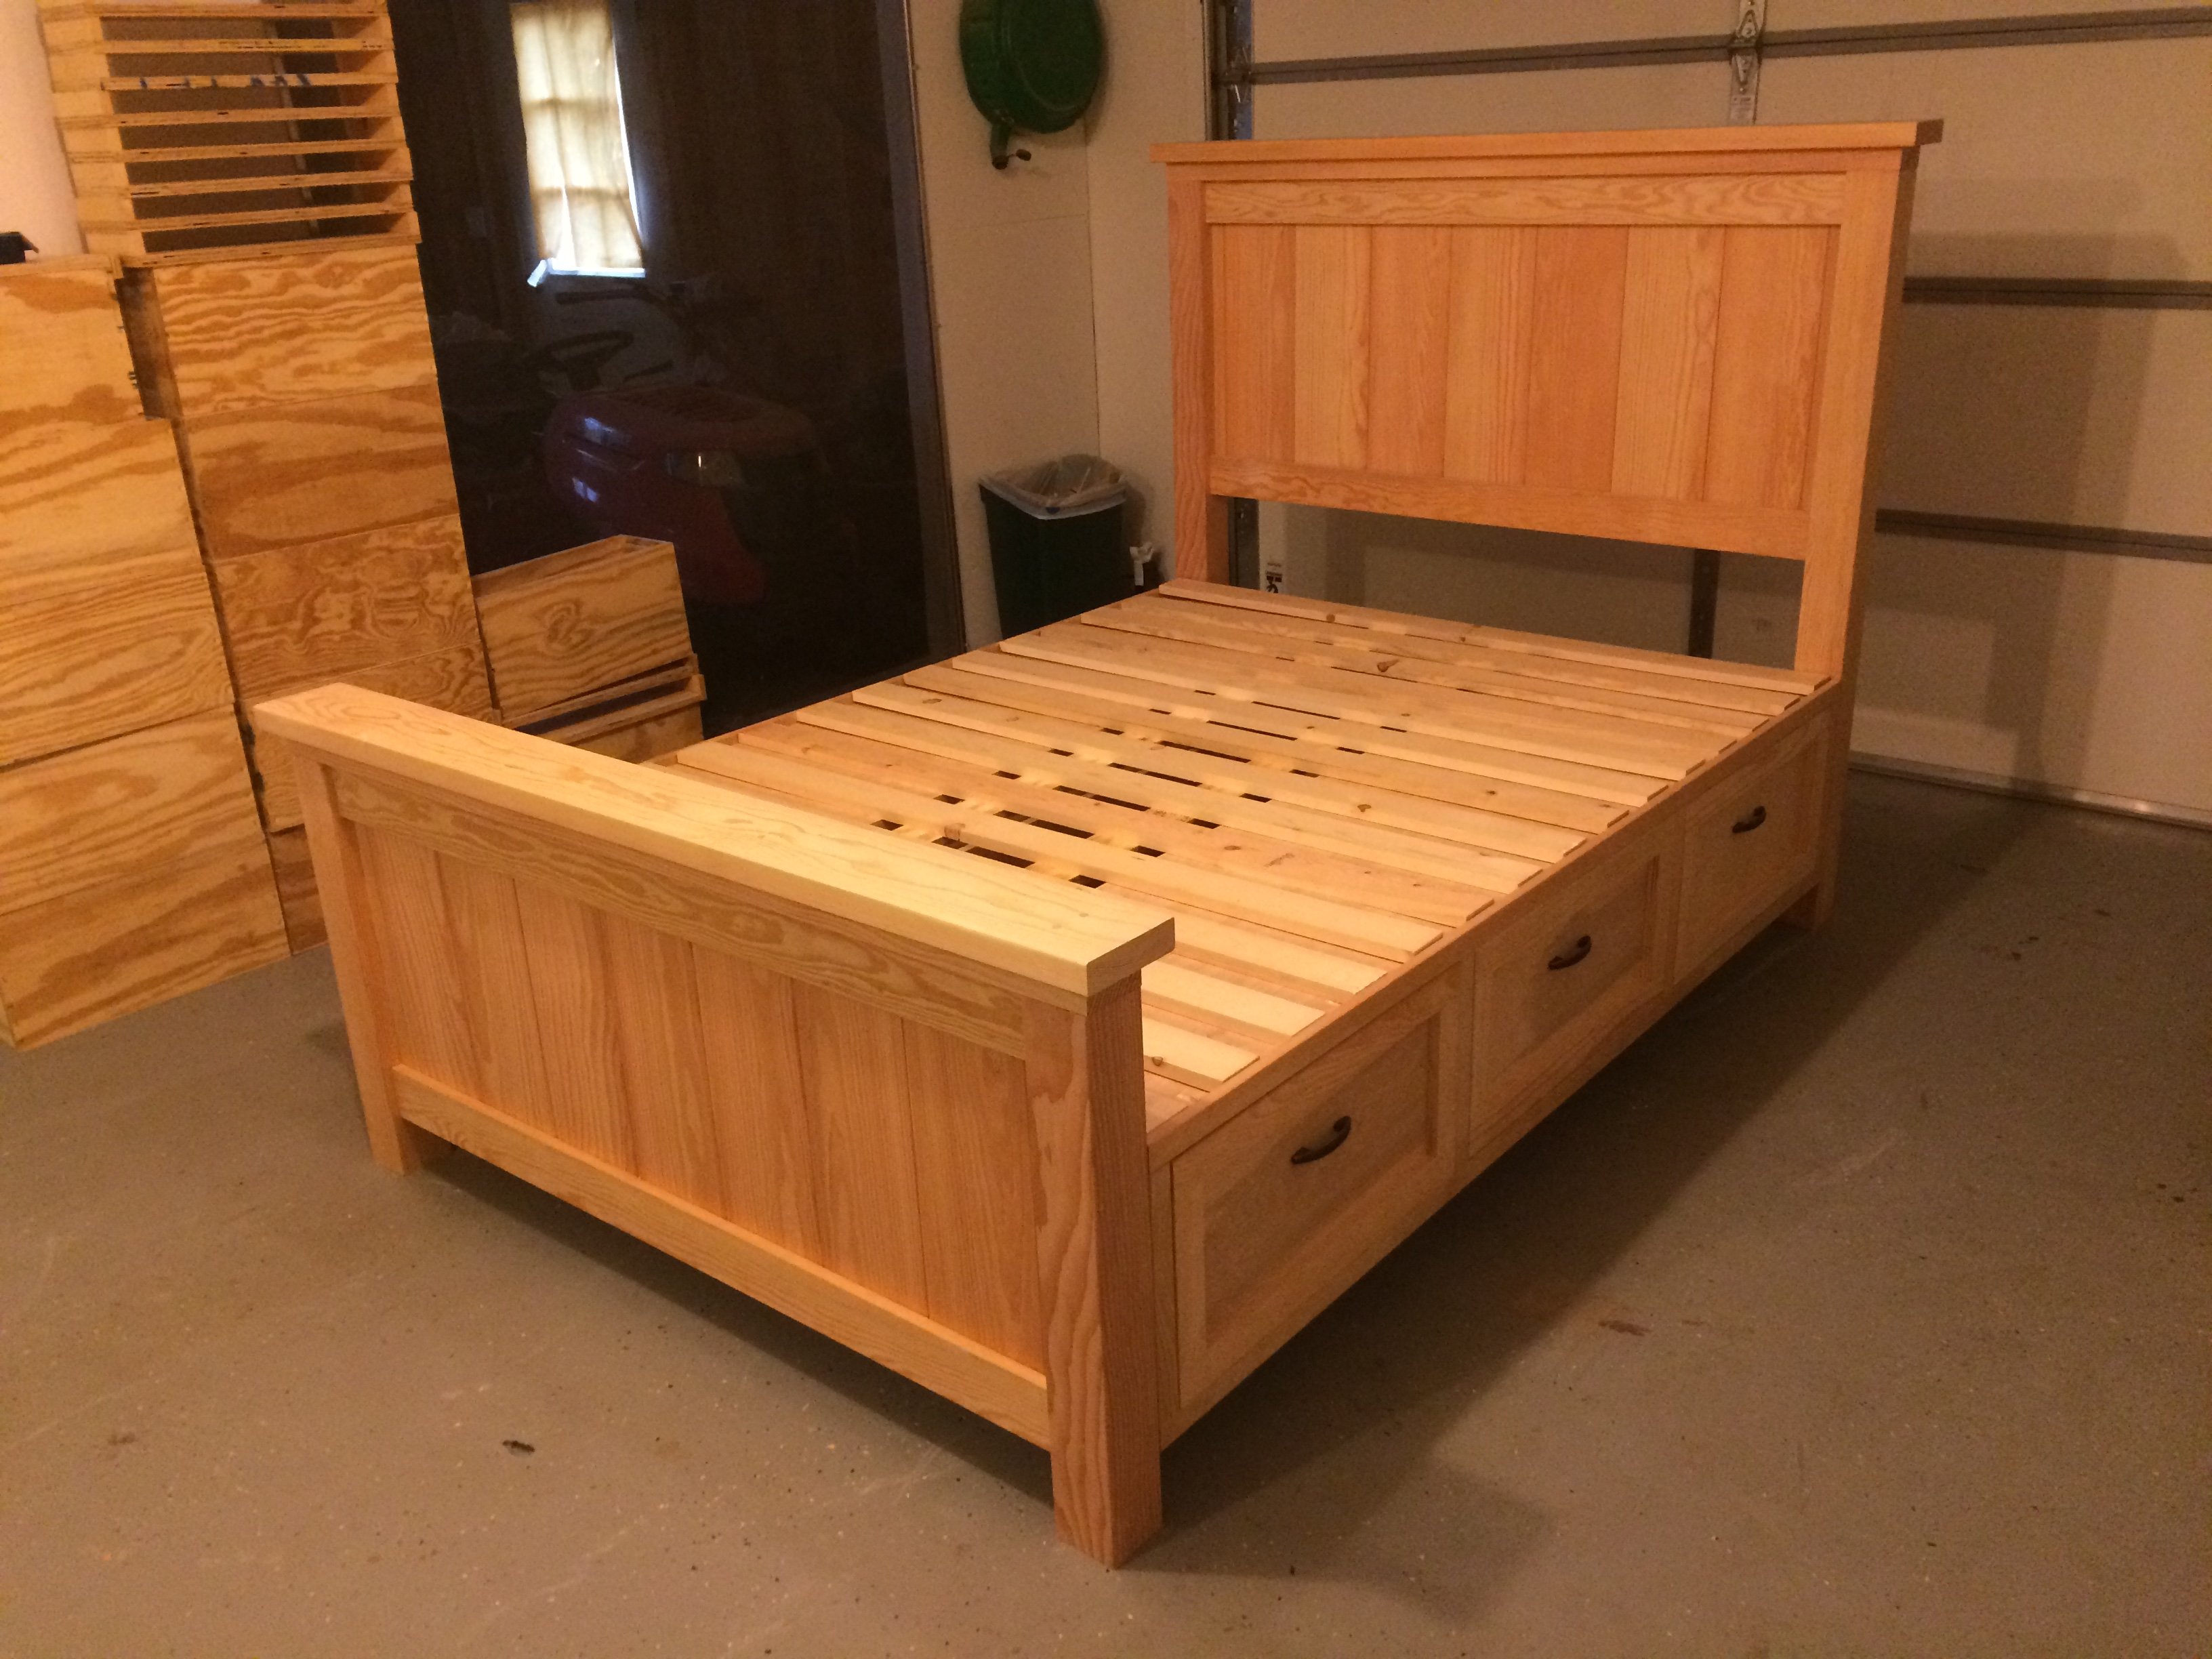 Farmhouse Storage Bed With Drawers, King Size Platform Bed Frame With Storage Plans